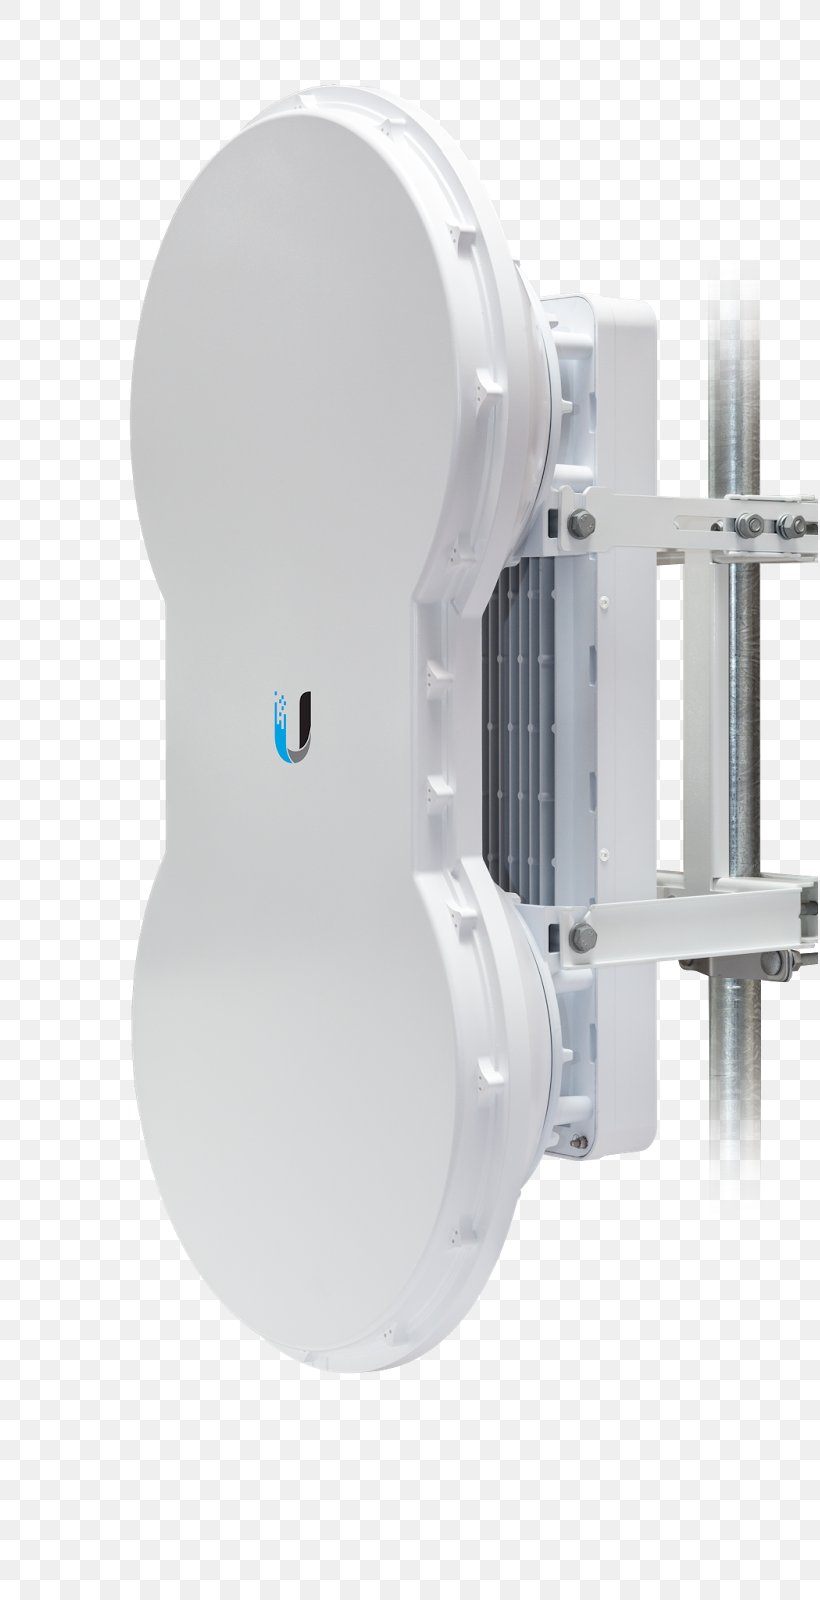 Point-to-point Ubiquiti Networks Bridging Backhaul U-NII, PNG, 817x1600px, Pointtopoint, Aerials, Backhaul, Bridging, Computer Network Download Free